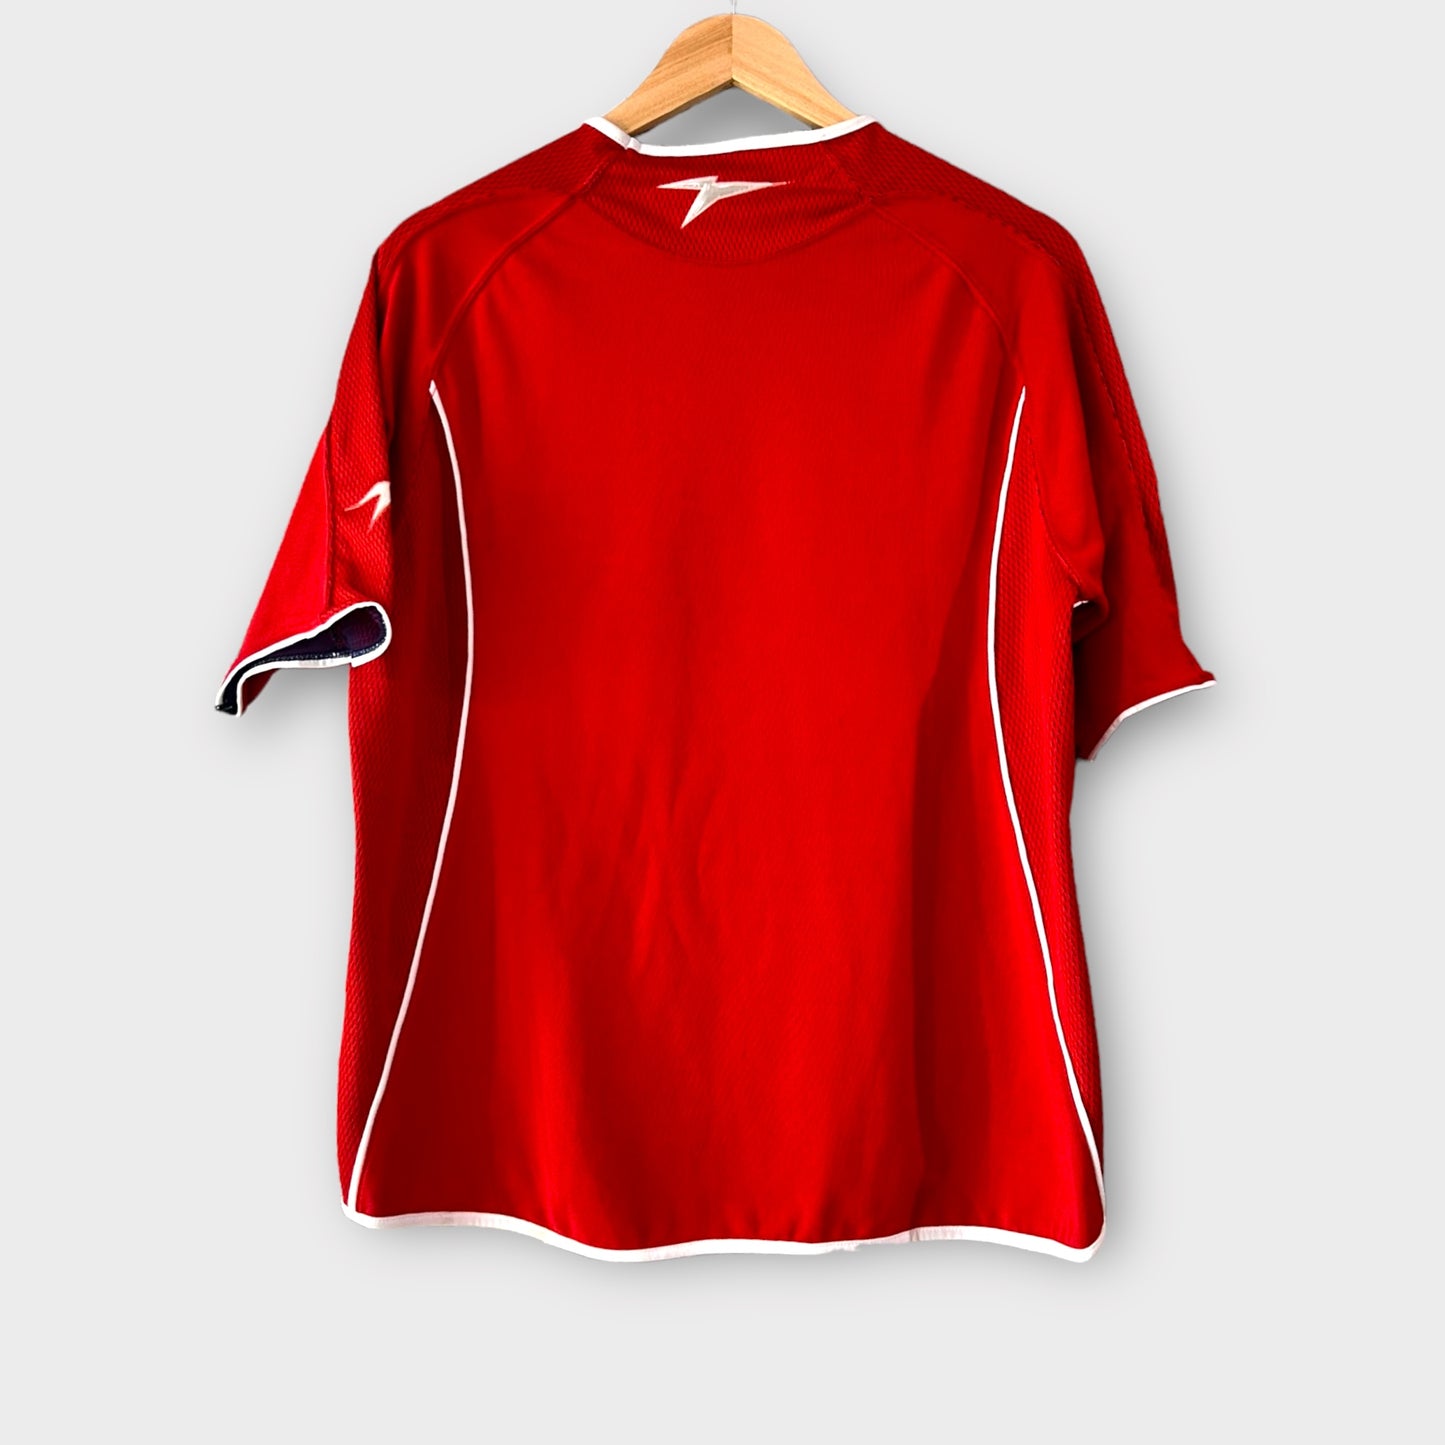 Independiente 2003/04 Home Shirt (Small)